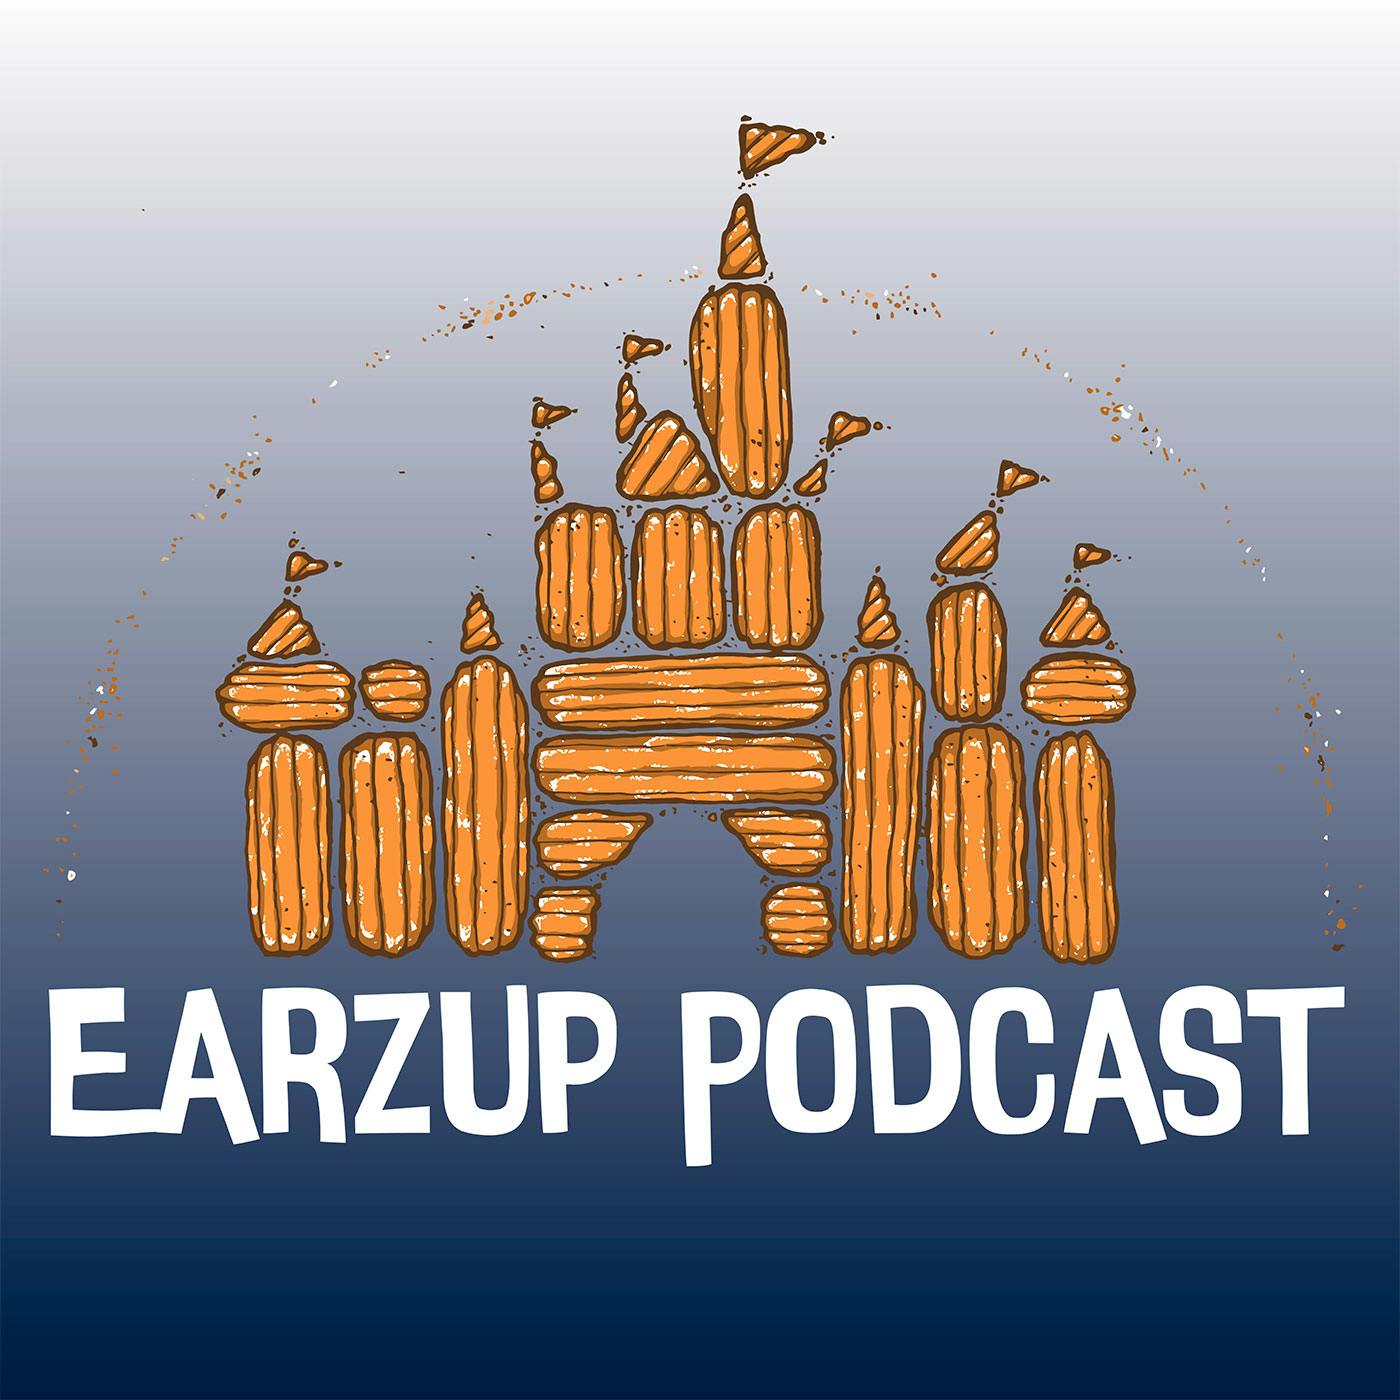 The EarzUp! 2018 Disney Year in Review